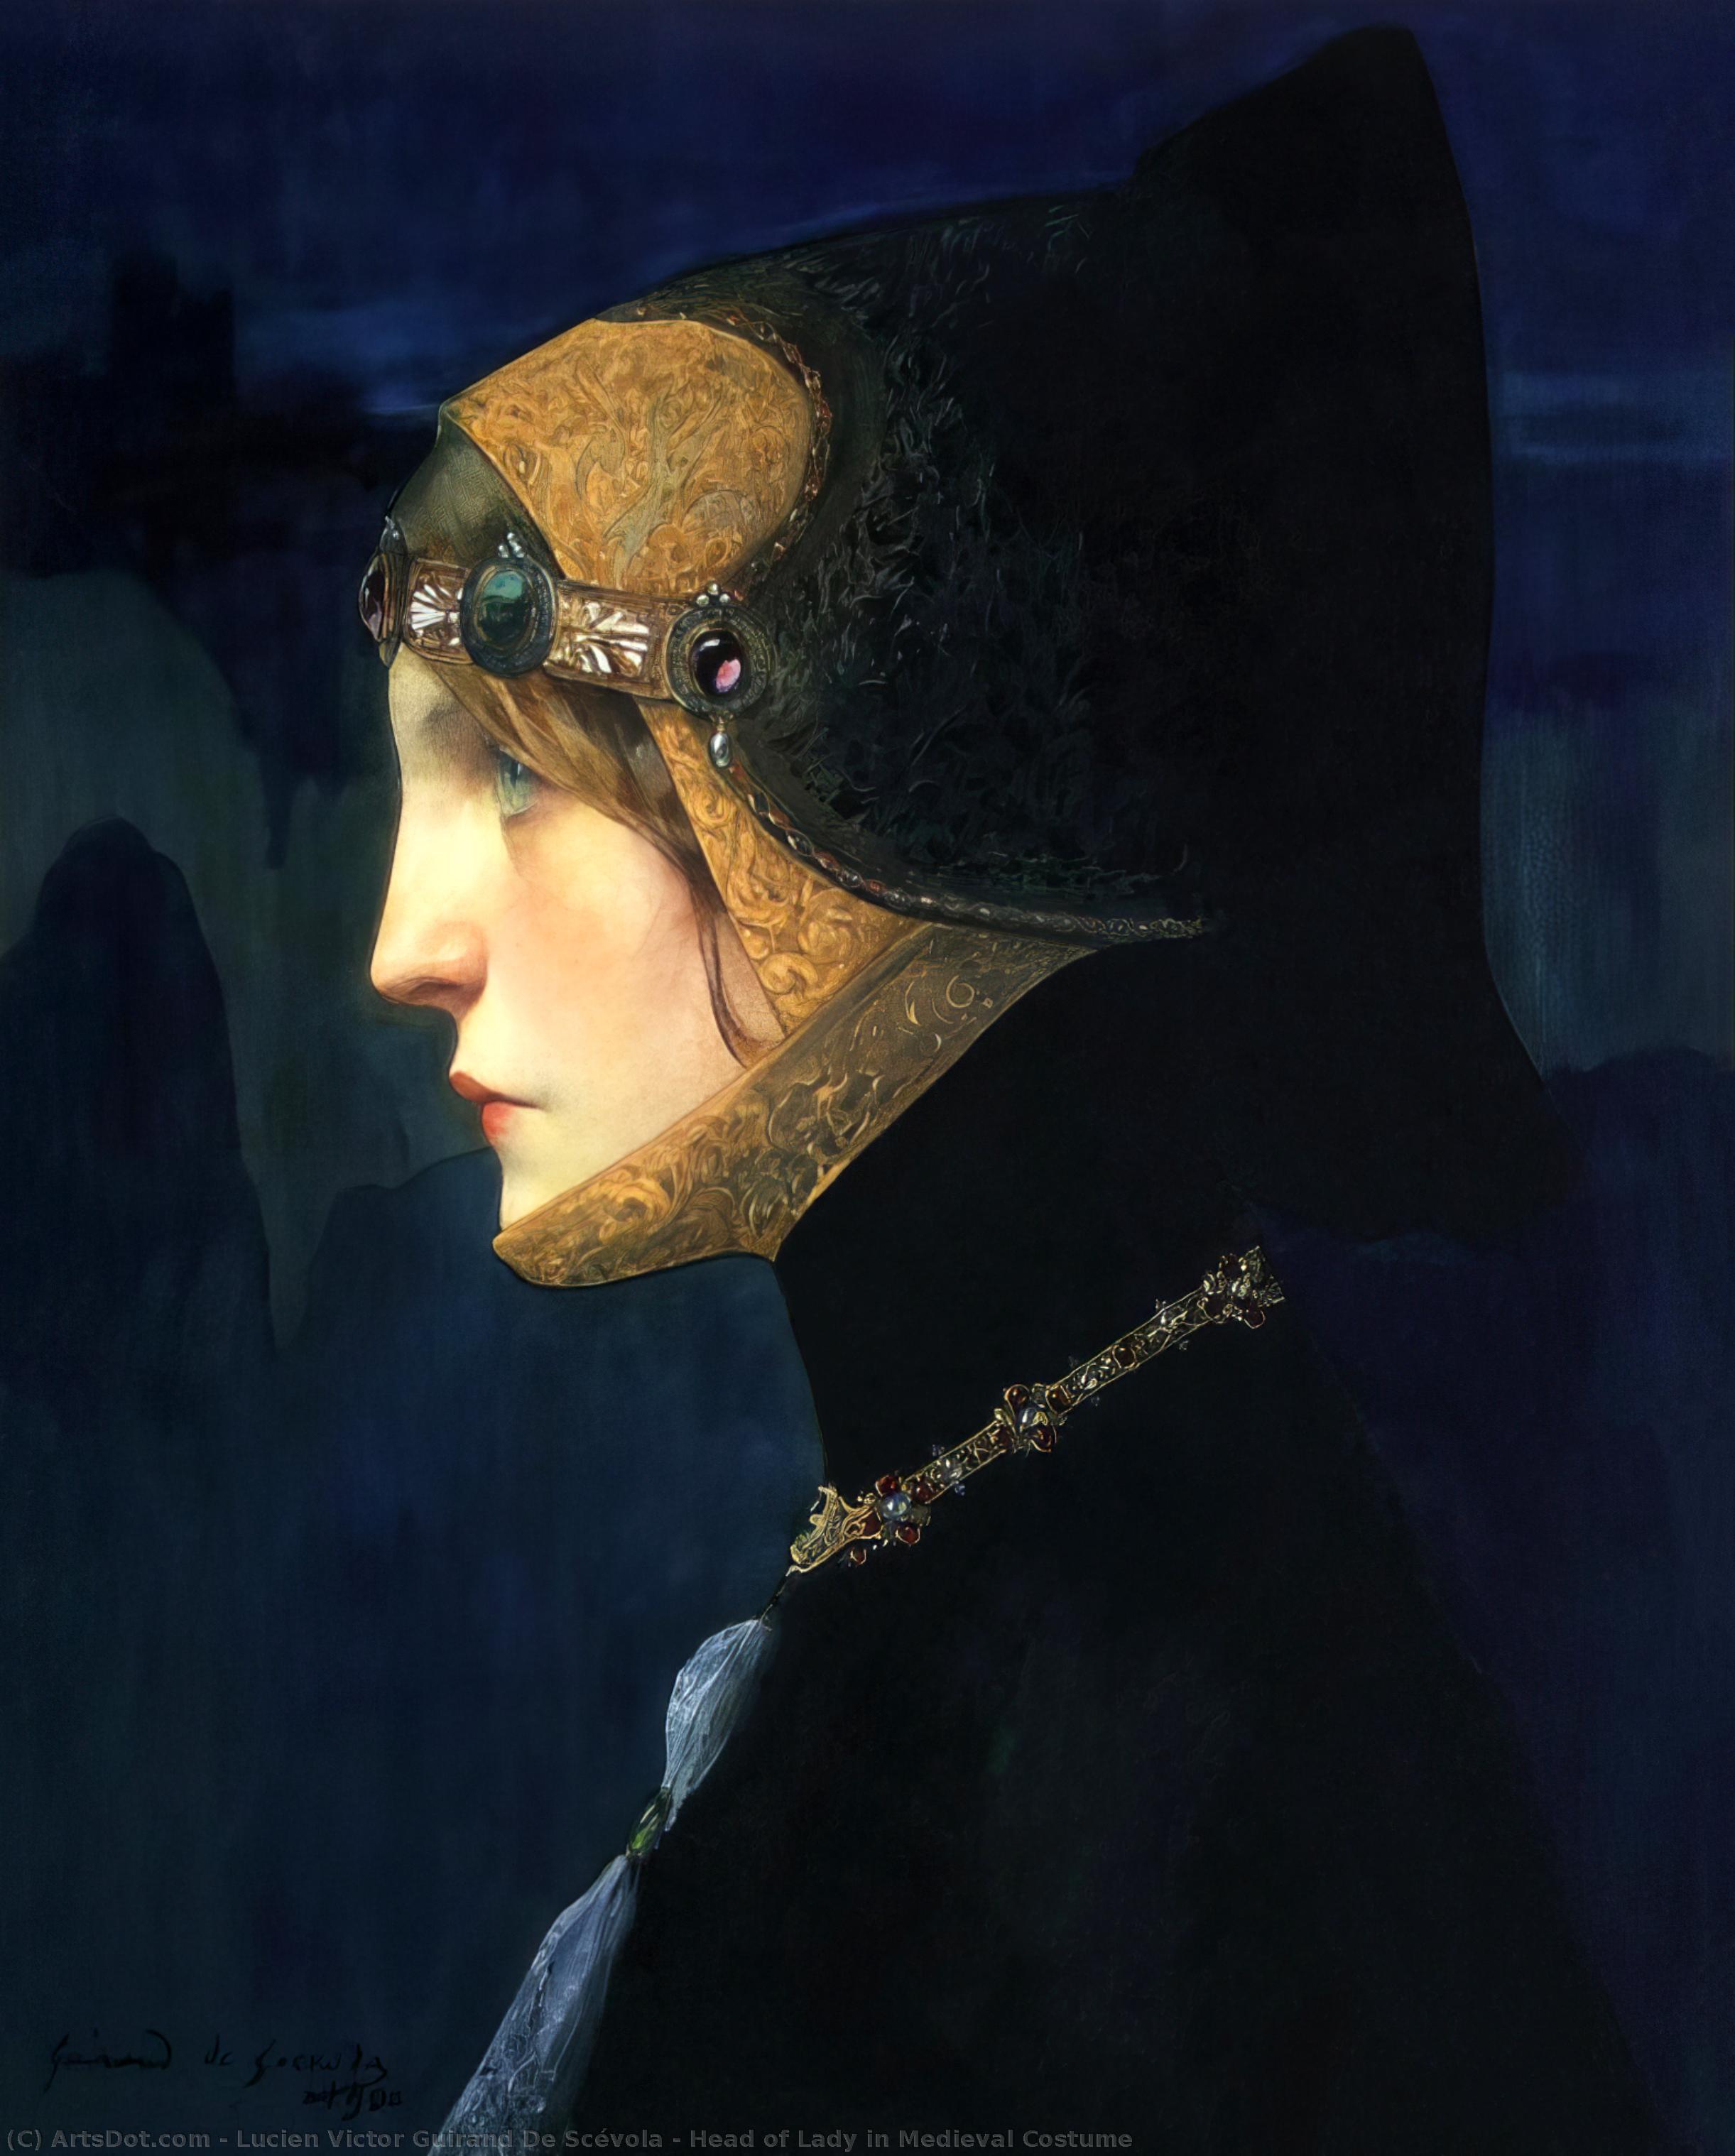 Buy Museum Art Reproductions Head of Lady in Medieval Costume, 1900 by Lucien Victor Guirand De Scévola (1871-1950, France) | ArtsDot.com